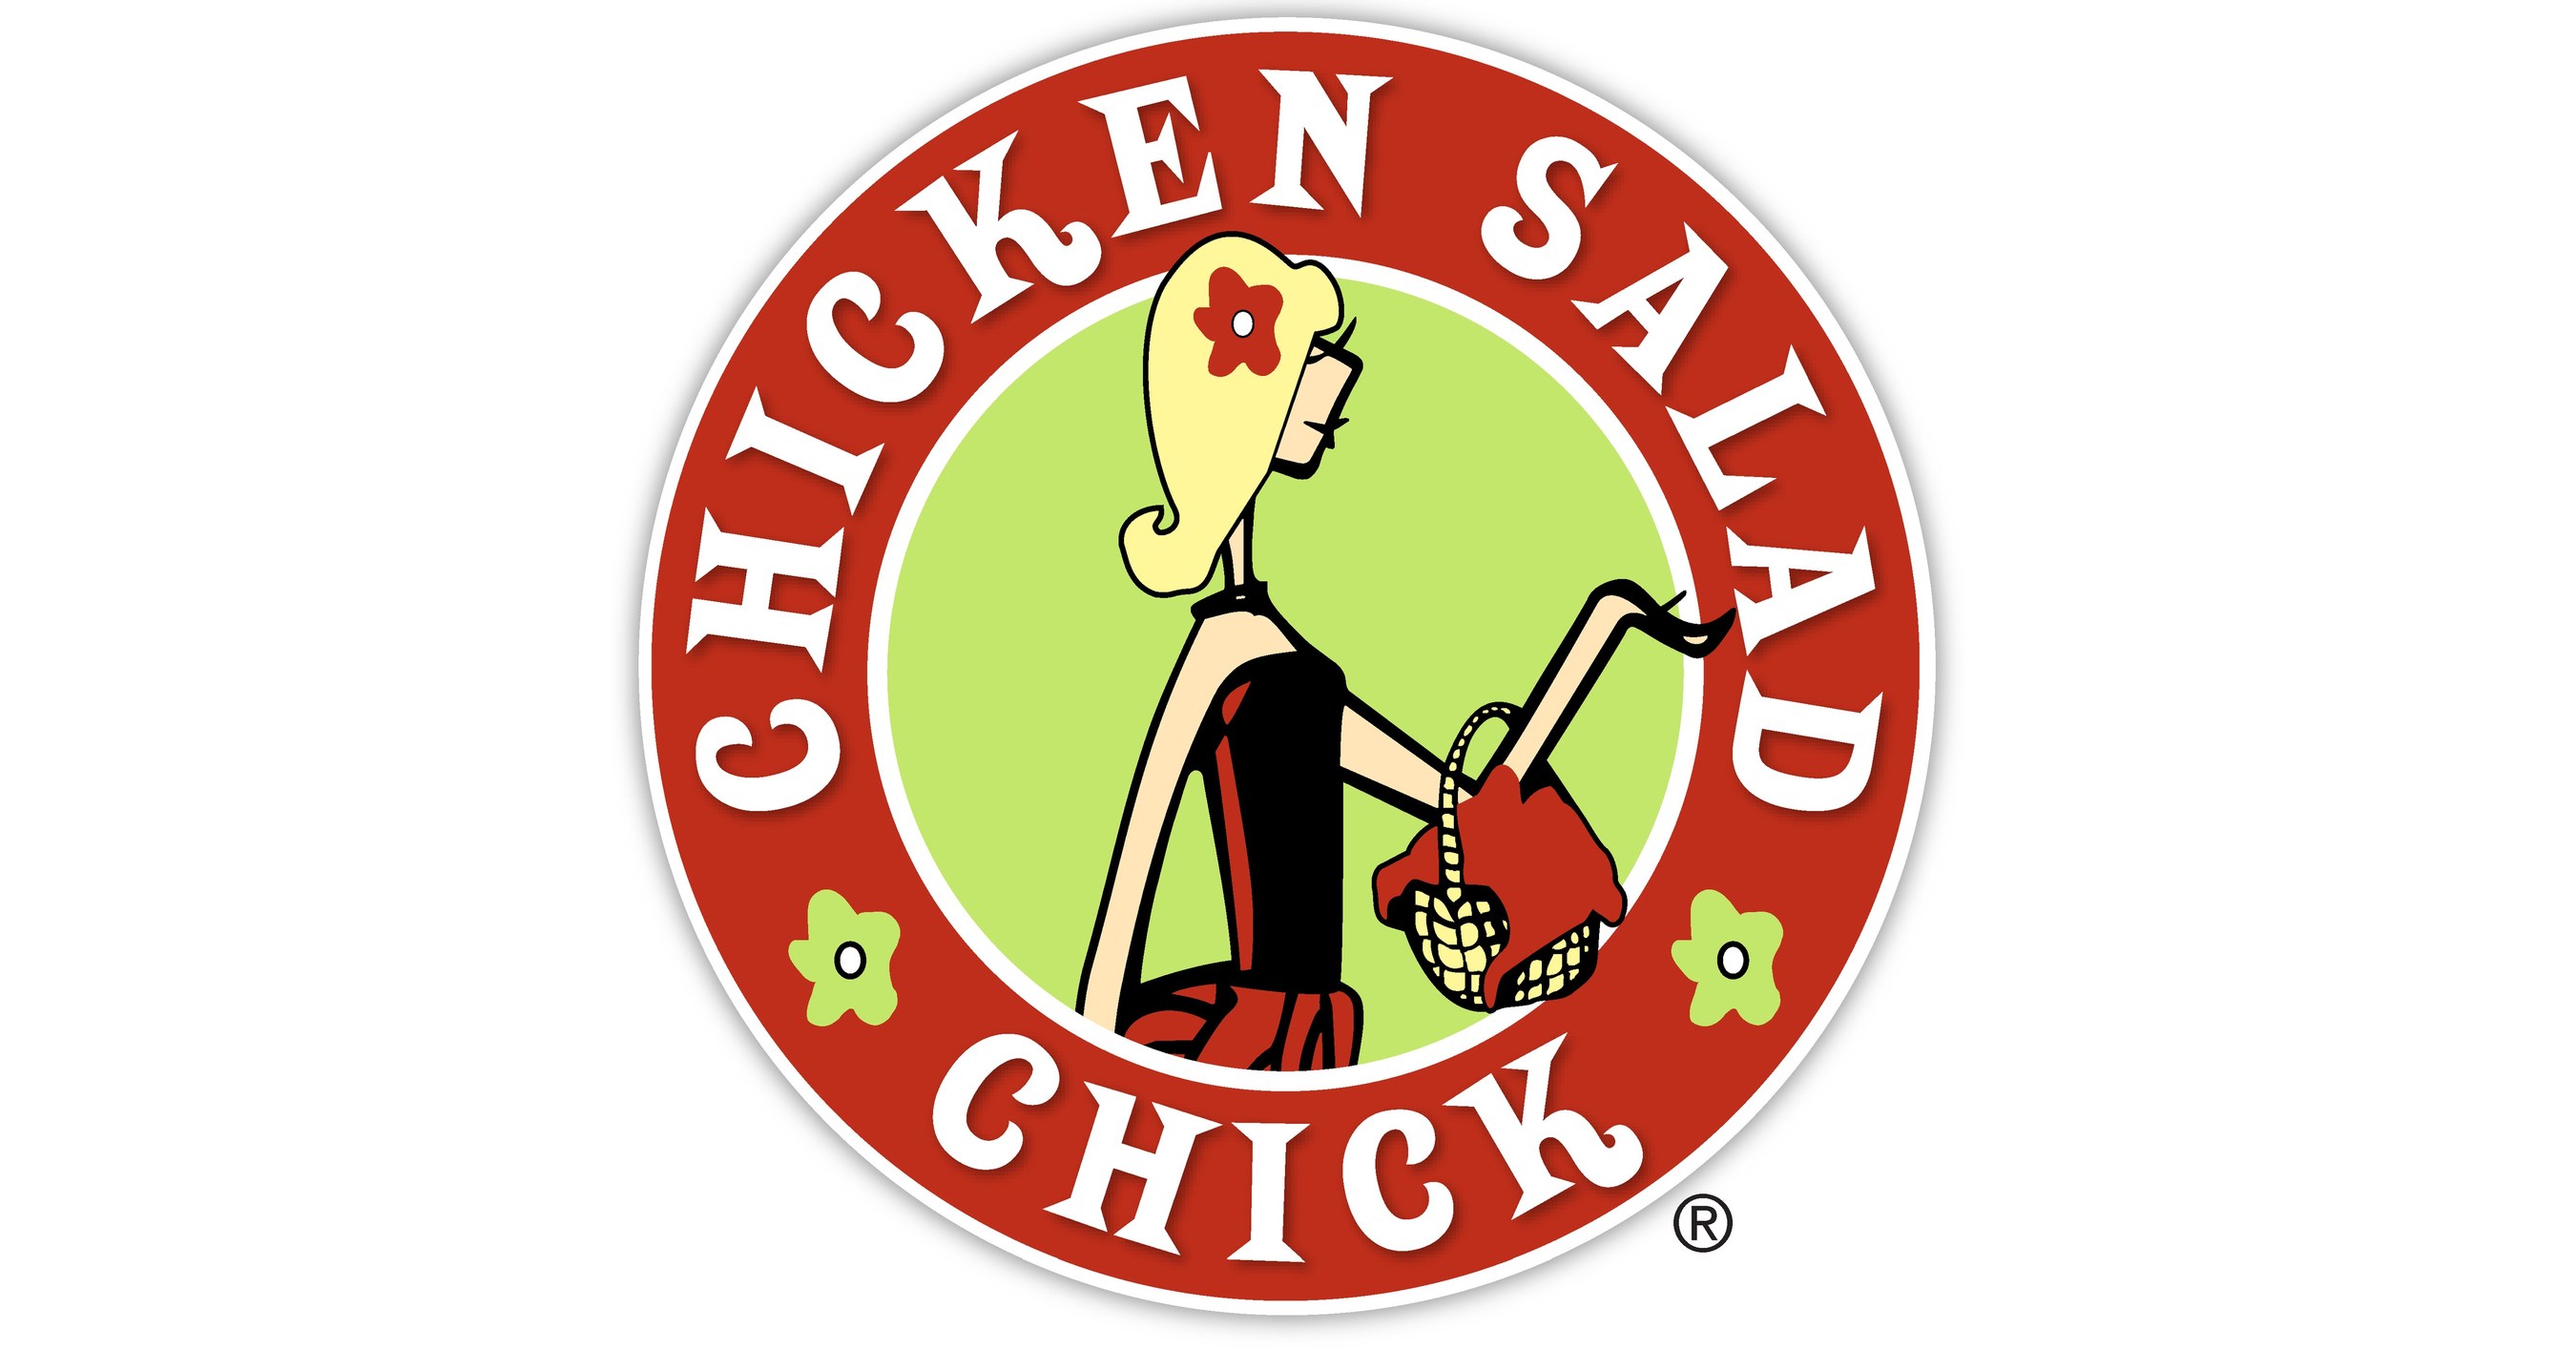 CHICKEN SALAD CHICK EXPANDS EXECUTIVE TEAM, NAMING ATTORNEY CAROL TERRY AS COMPANY’S FIRST IN-HOUSE COUNSEL